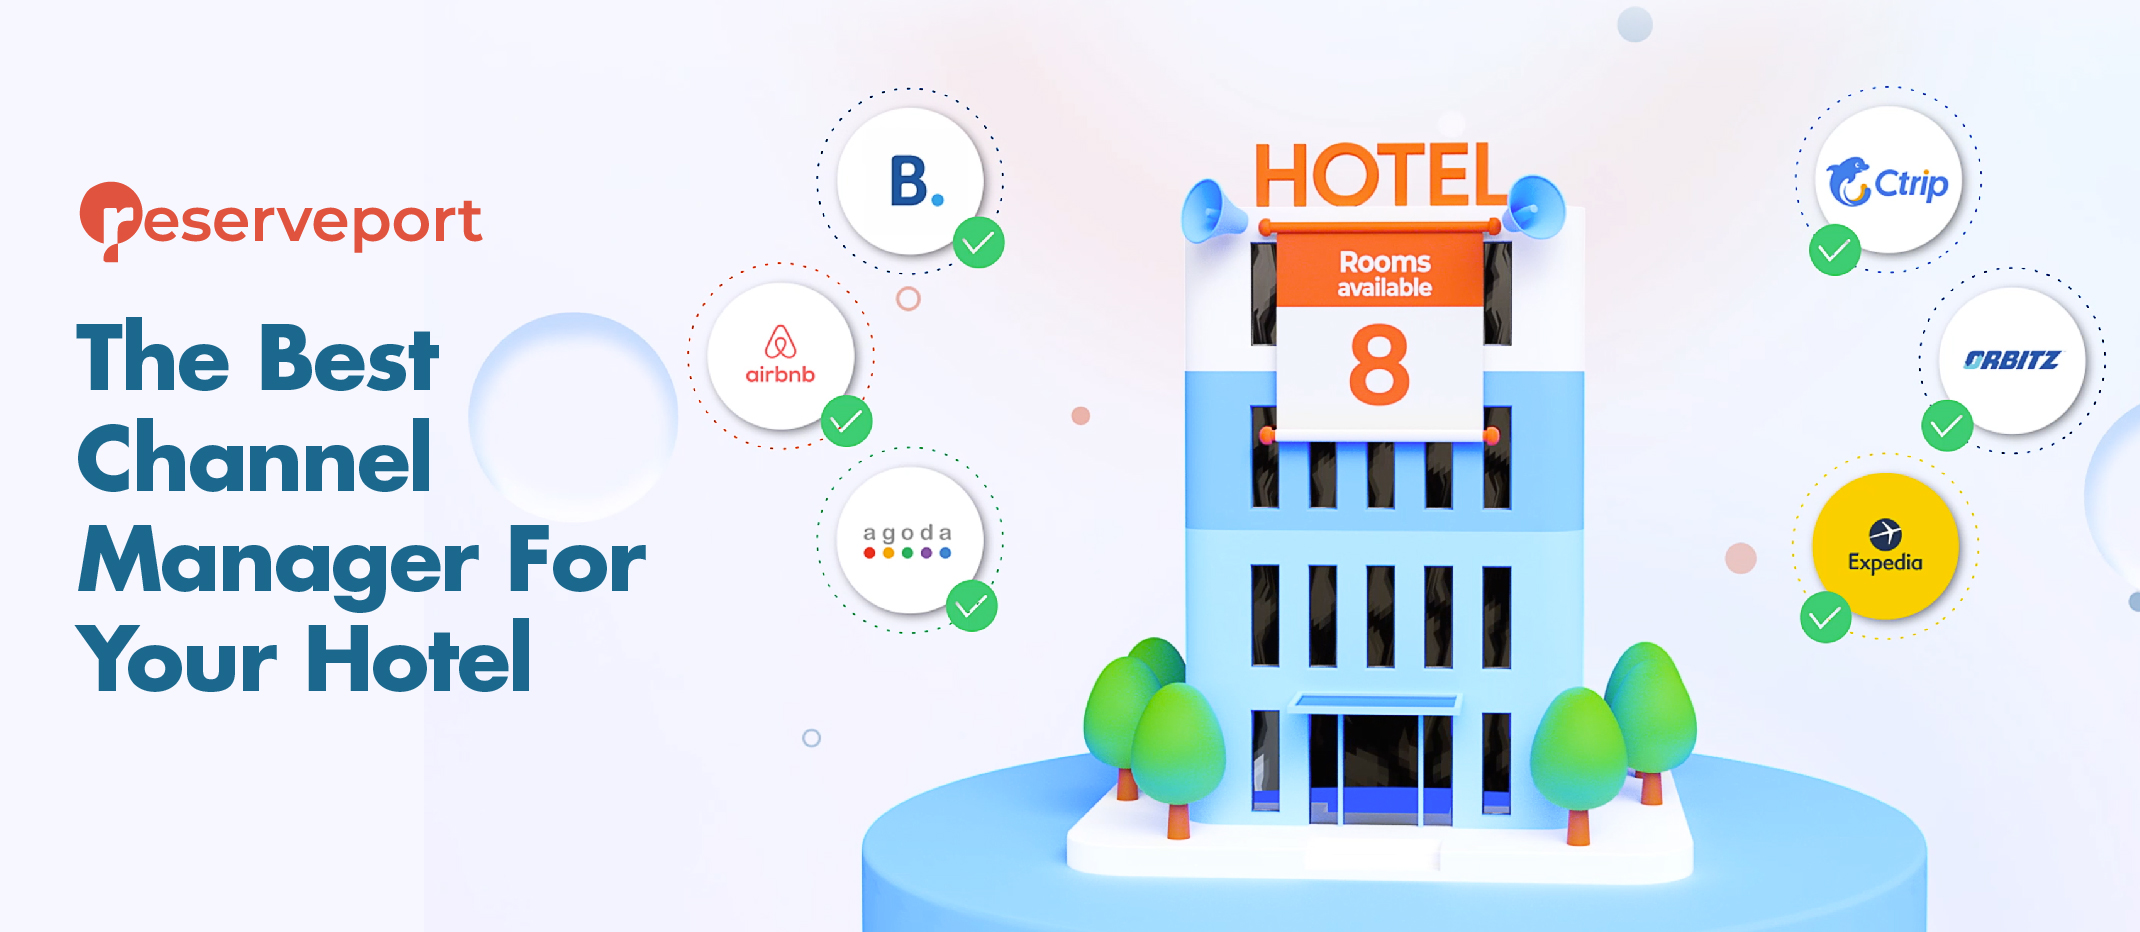 How To Choose The Best Channel Manager For Your Hotel